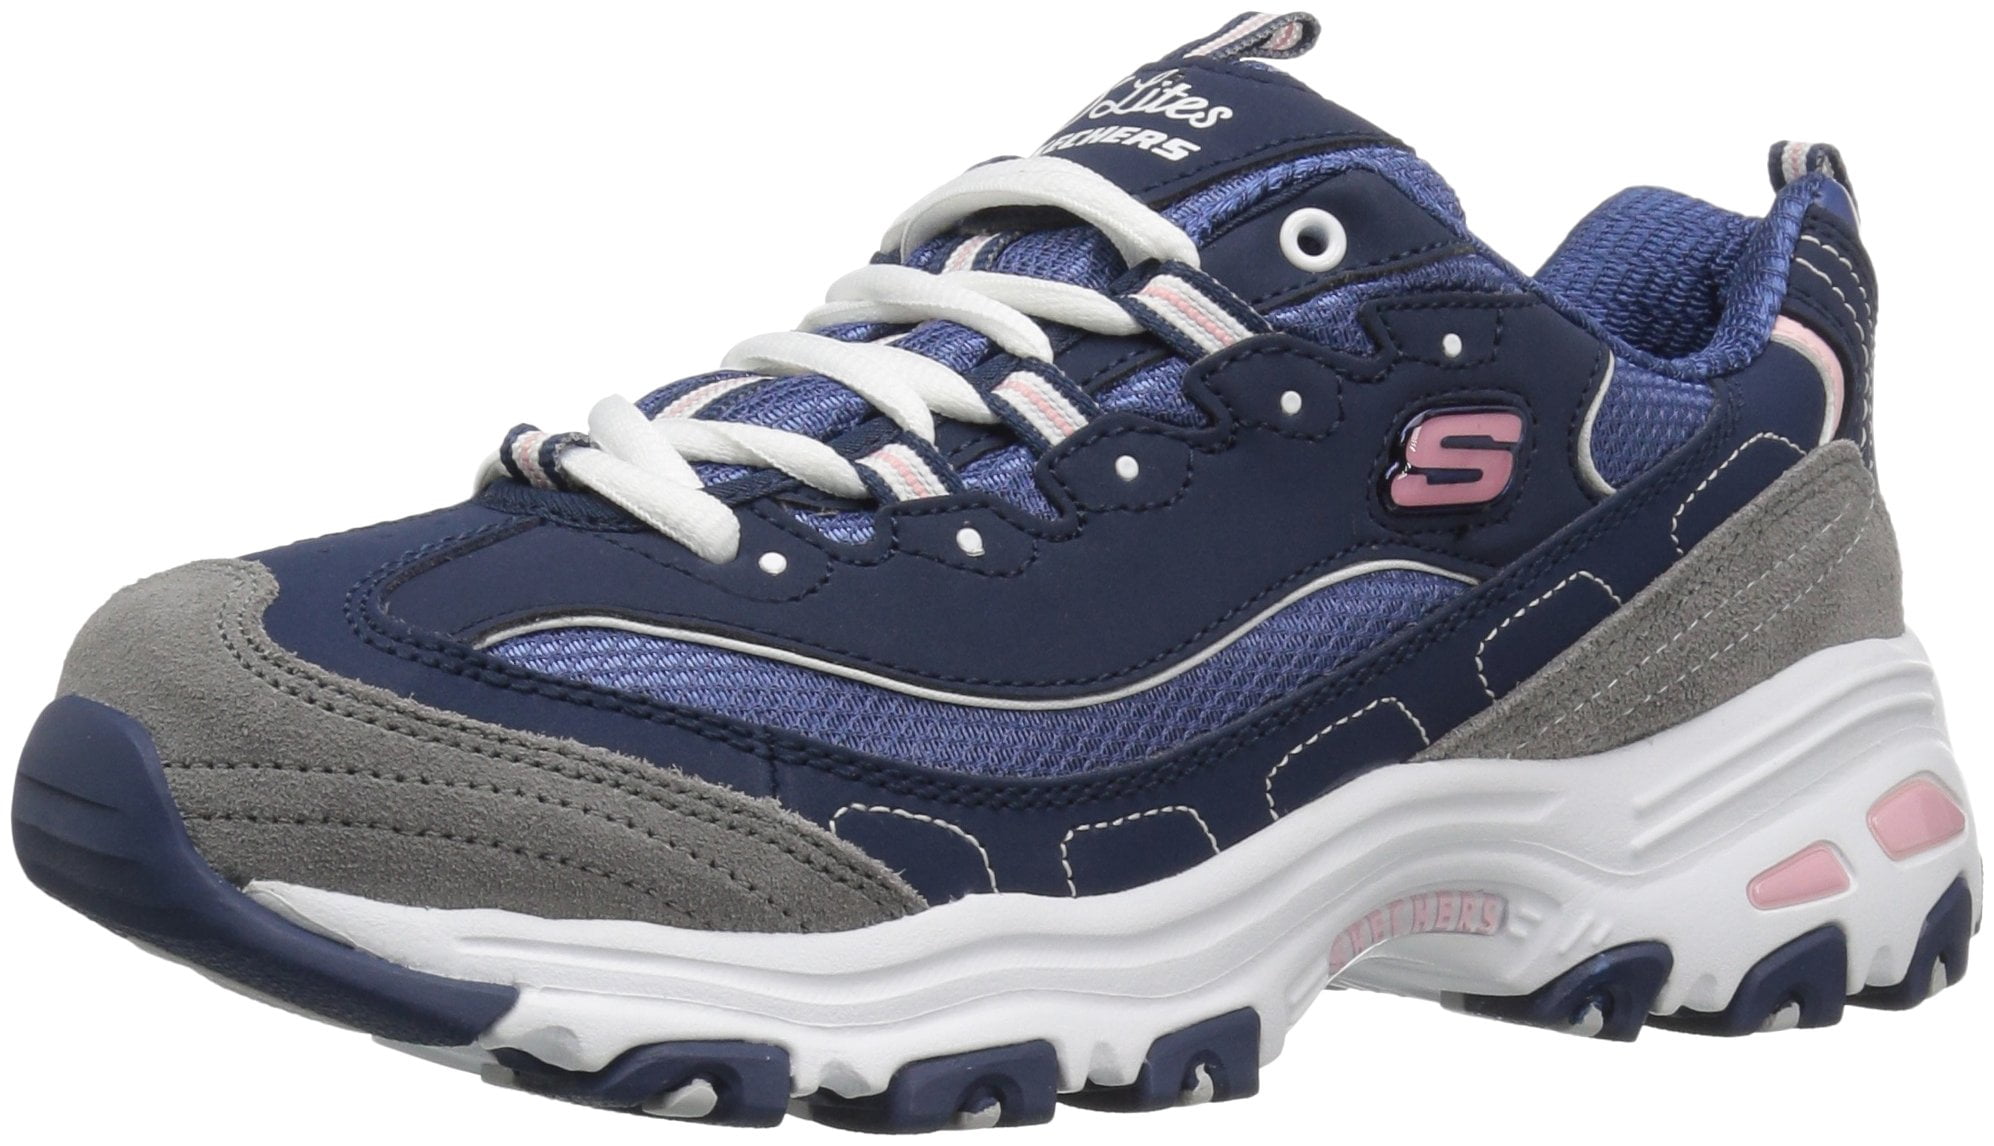 skechers-women-size-chart-17-printable-size-chart-shoes-forms-and-templates-skechers